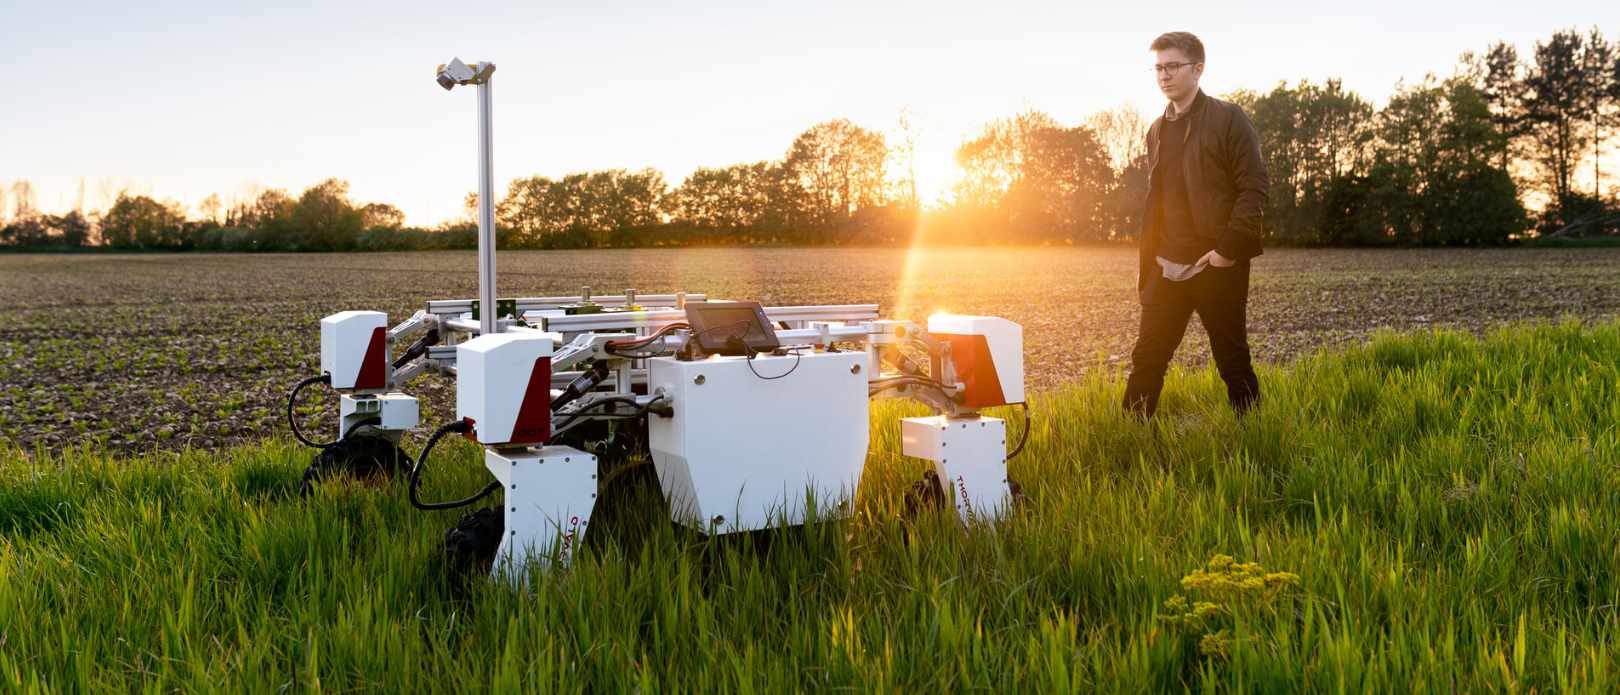 Man standing with sustainable agricultural robot in field